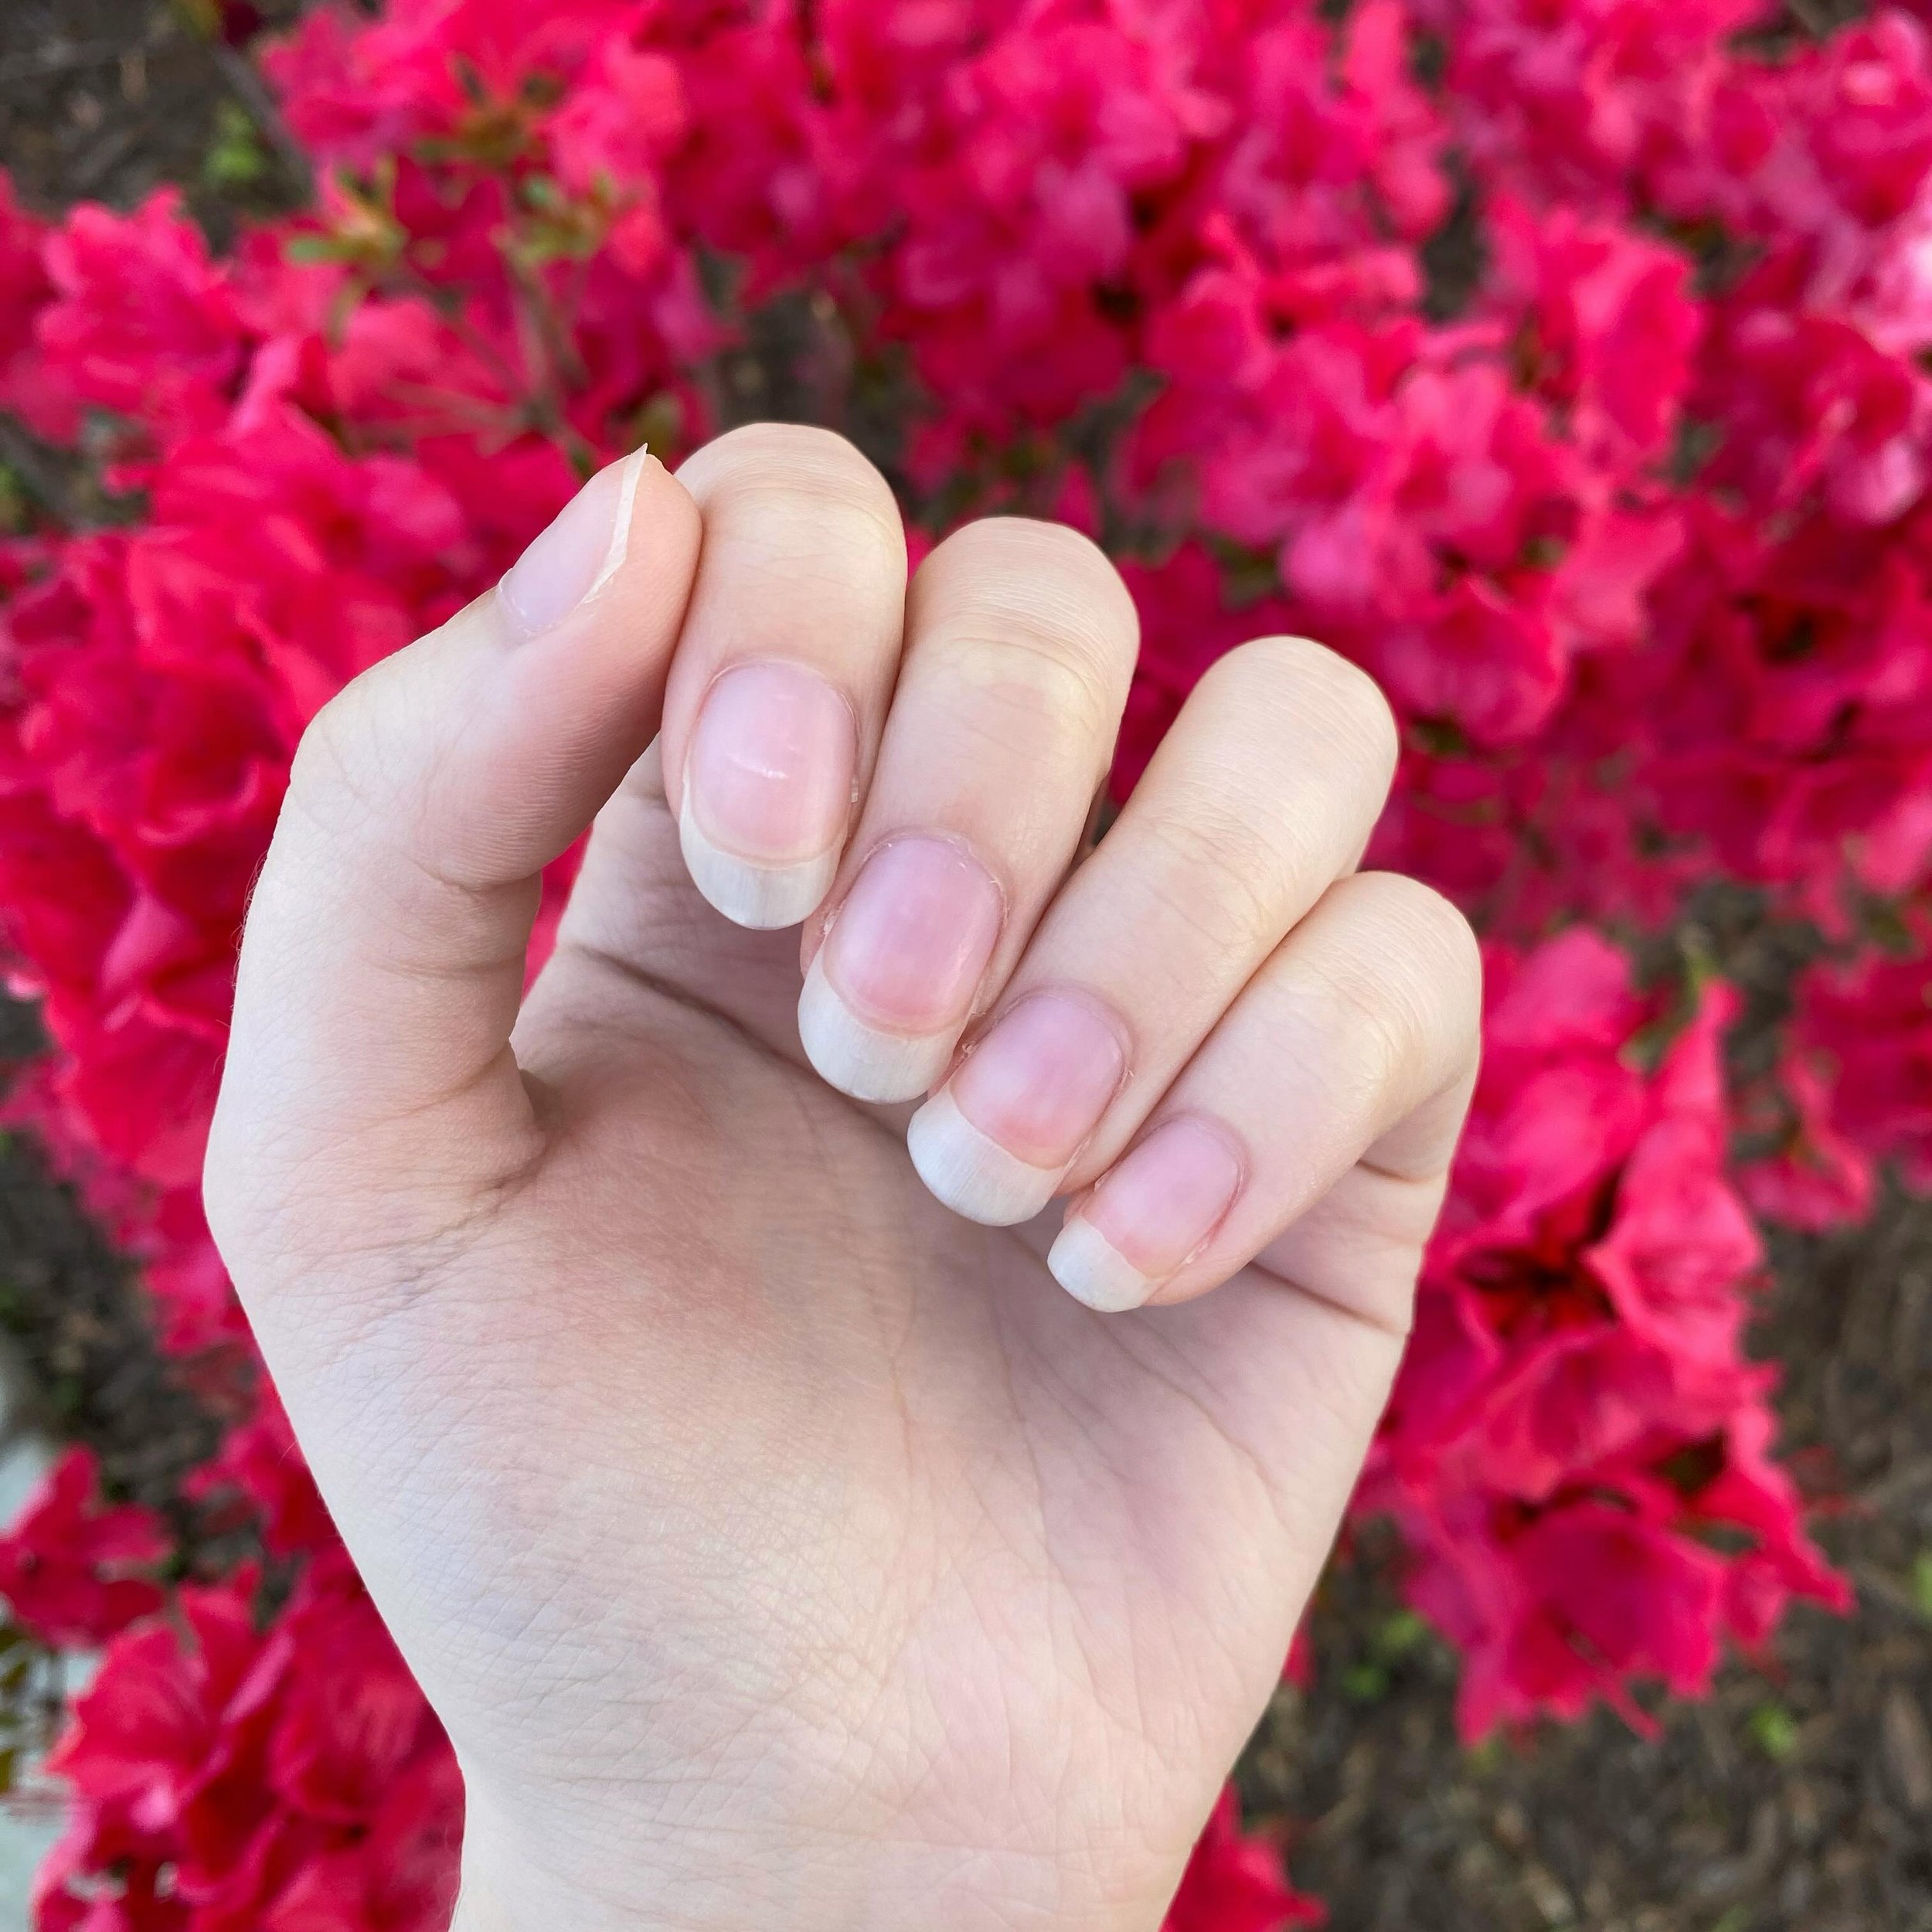 These flowers I spotted out and about were just too beautiful to not take a nailfie with!! 🤭 God has been consistently amazing me with every bloom I see, so I wanted to share some particularly vibrant ones with you. 🌺💕

How have you been? ✨ It&rsq